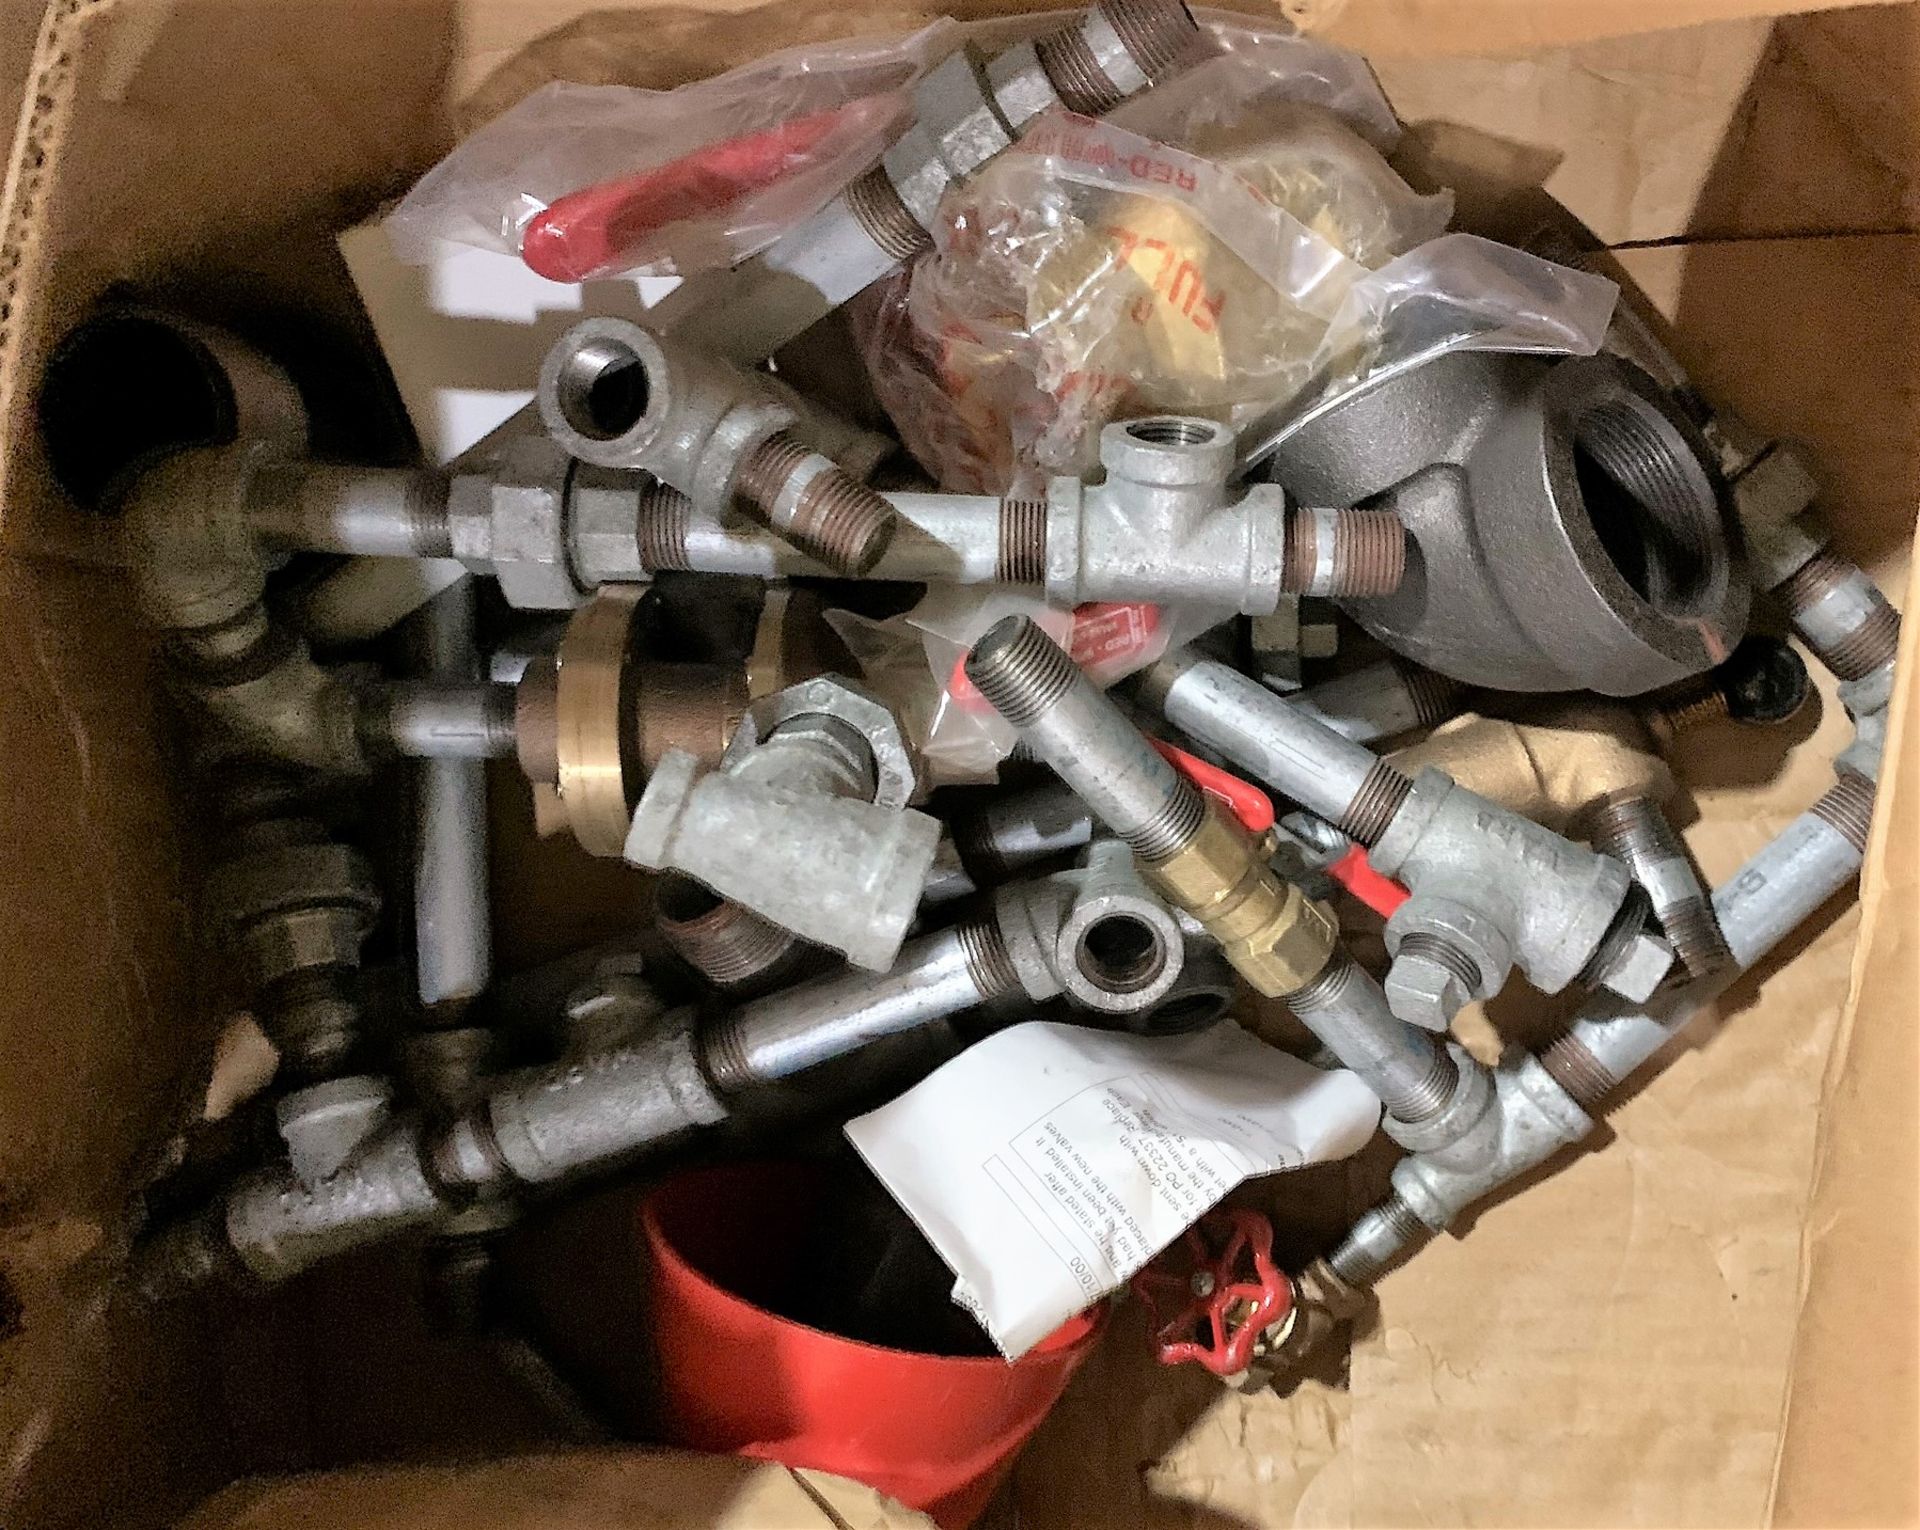 Lot of Assorted Plumbing Parts & Kits - Image 2 of 5